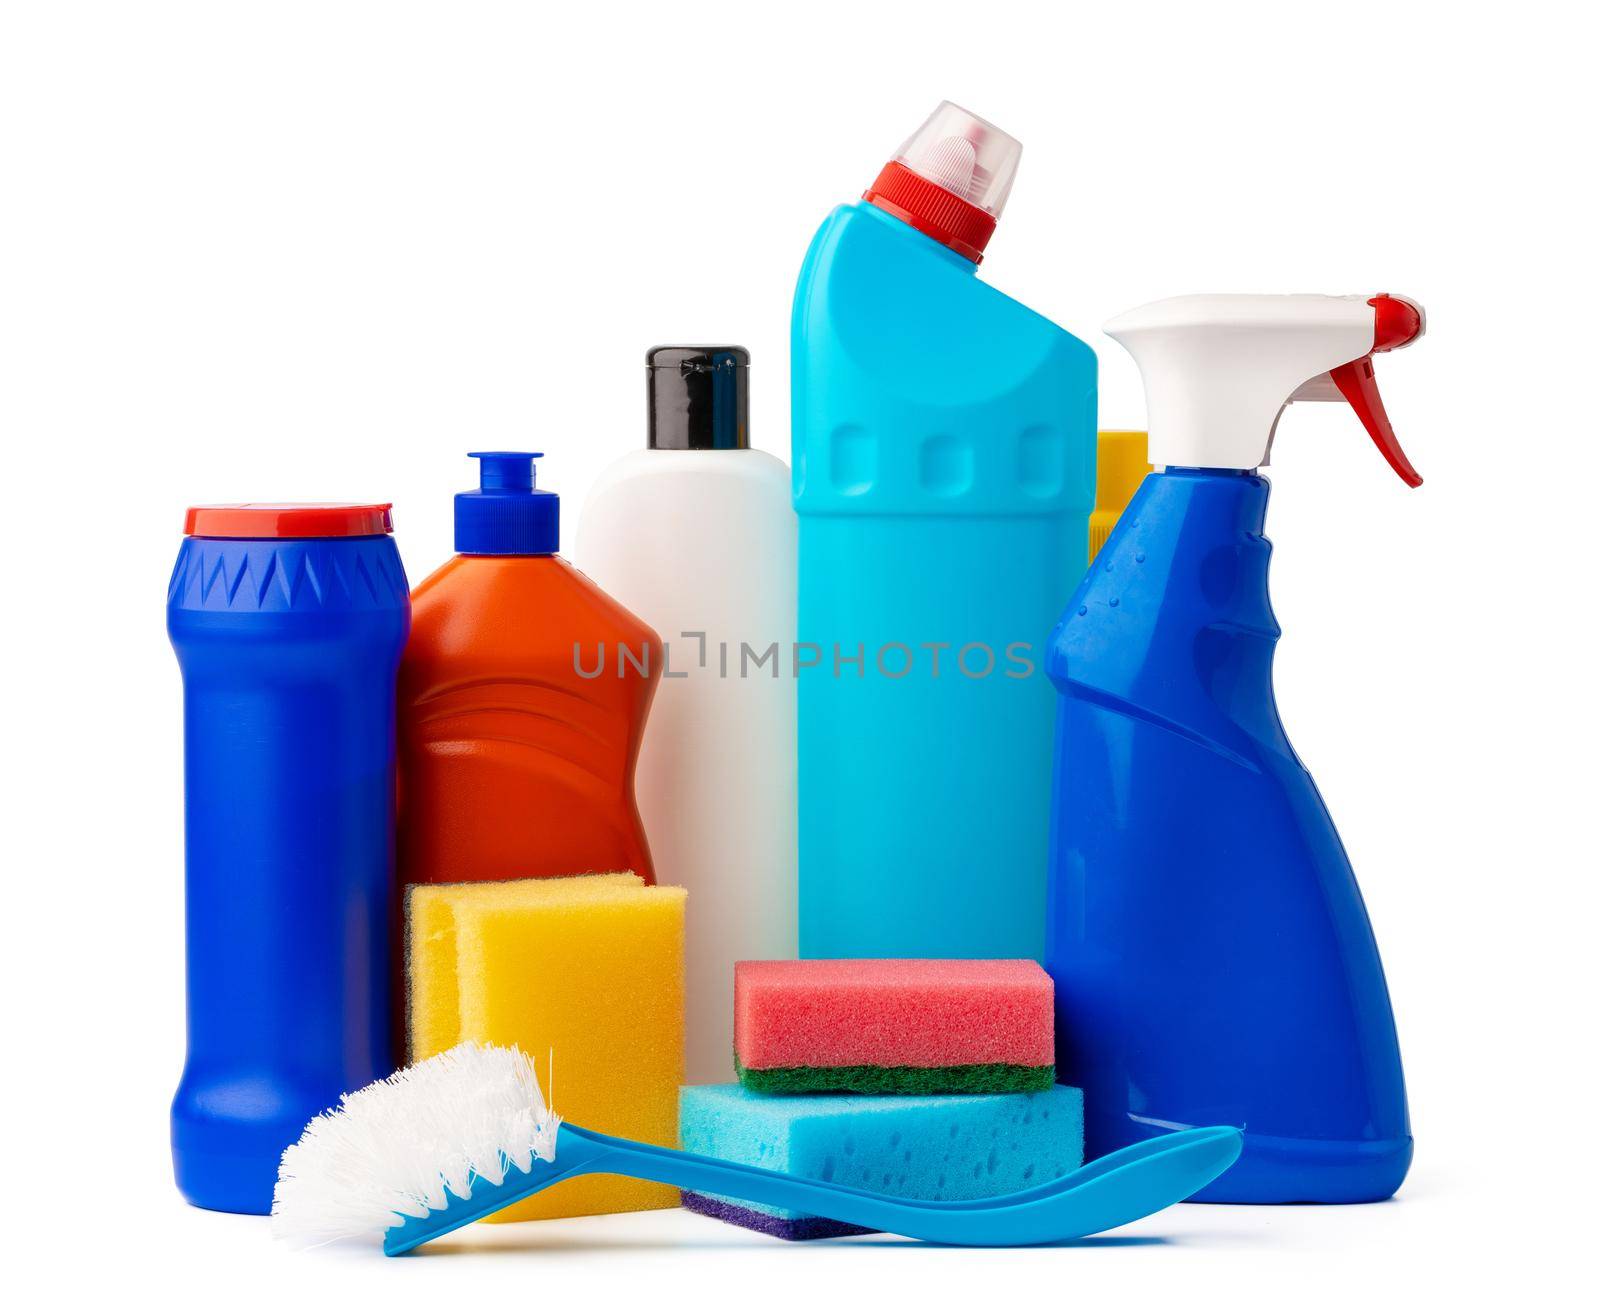 Sanitary household cleaning items isolated on white background by Fabrikasimf